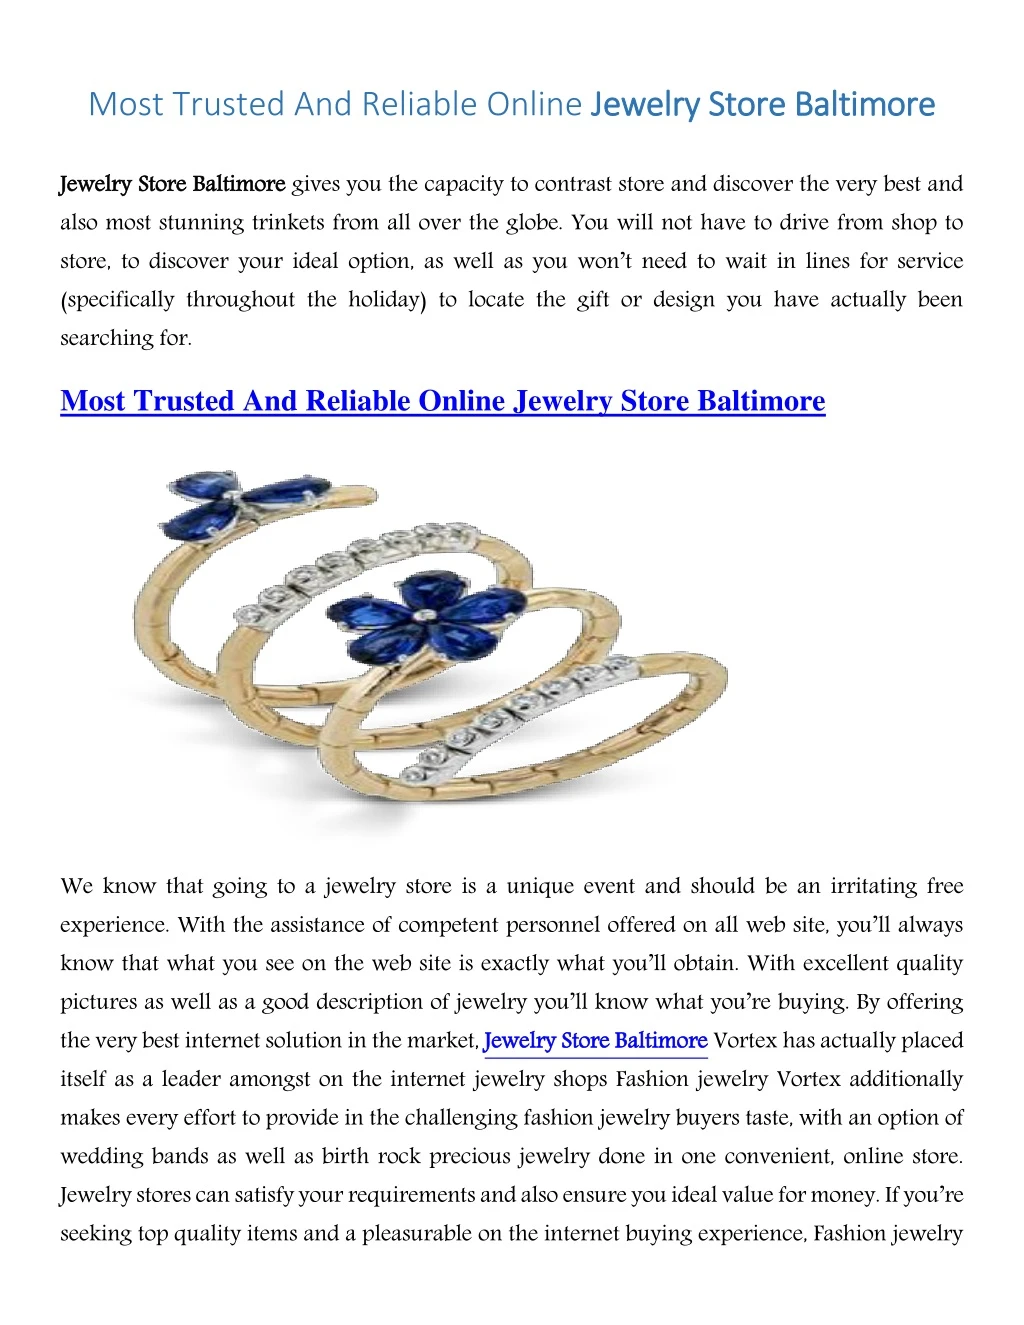 most trusted and reliable online jewelry store n.